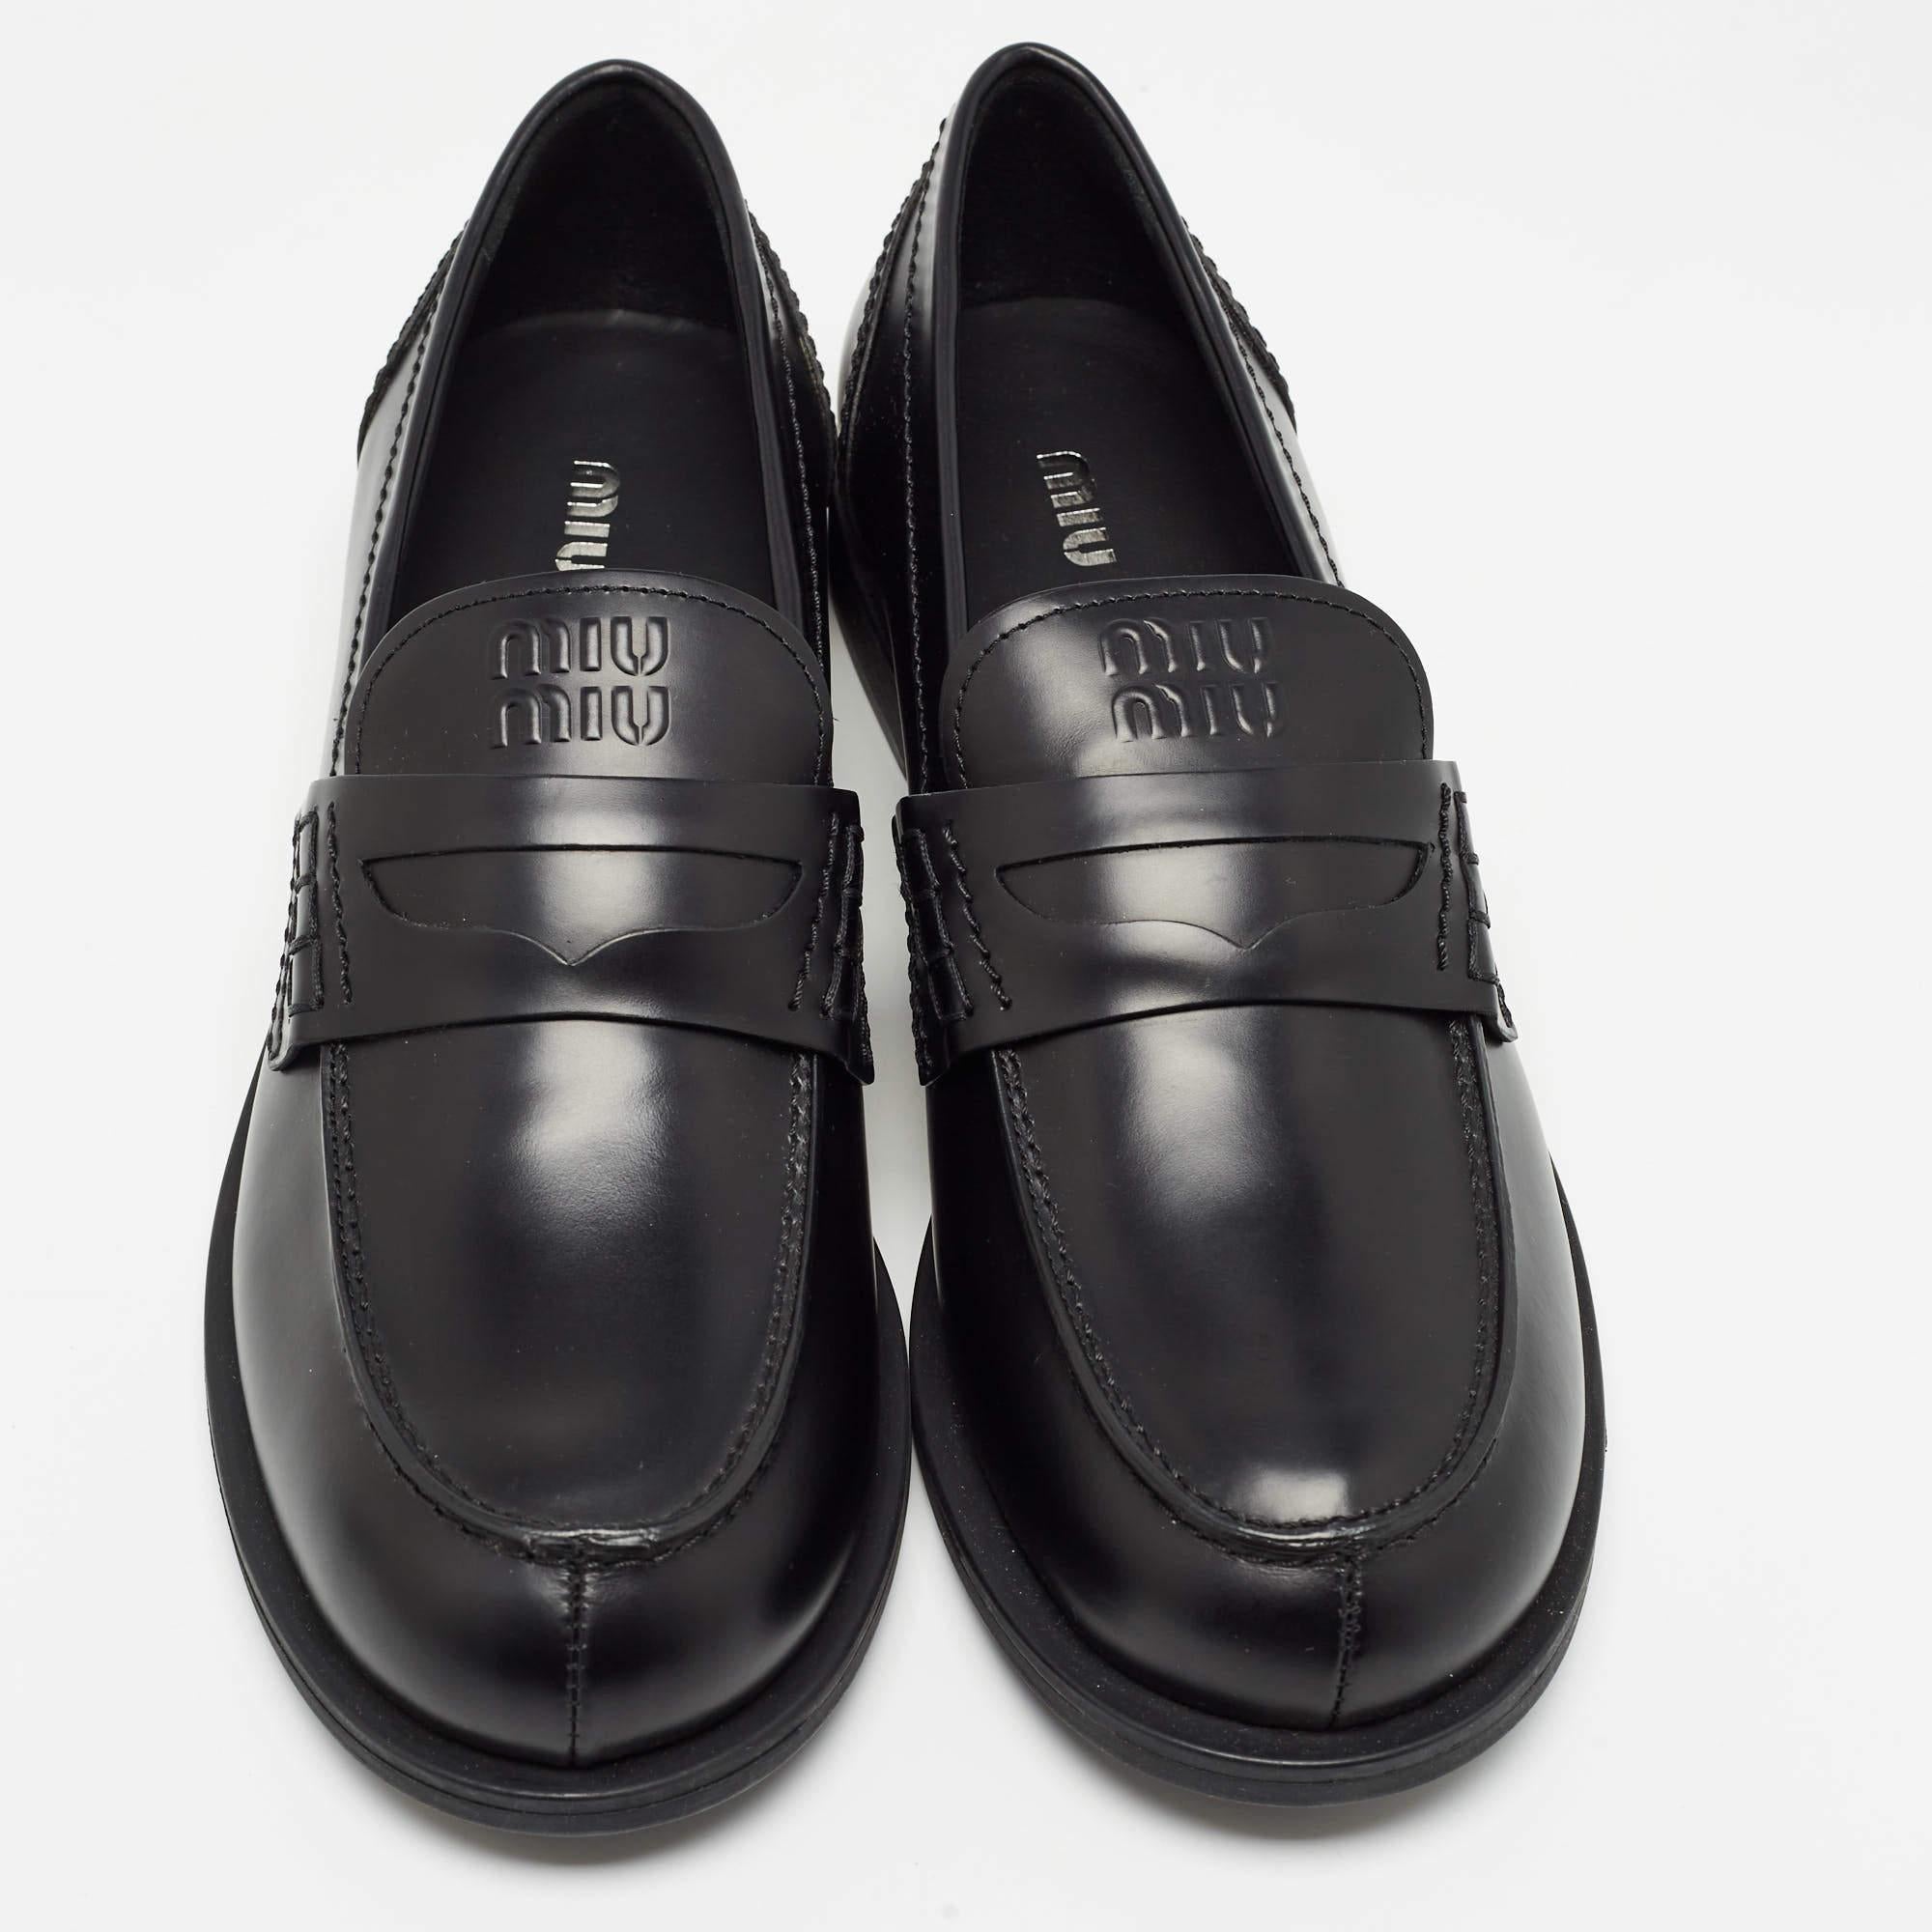 Practical, fashionable, and durable—these Miu Miu loafers are carefully built to be fine companions to your everyday style. They come made using the best materials to be a prized buy.

